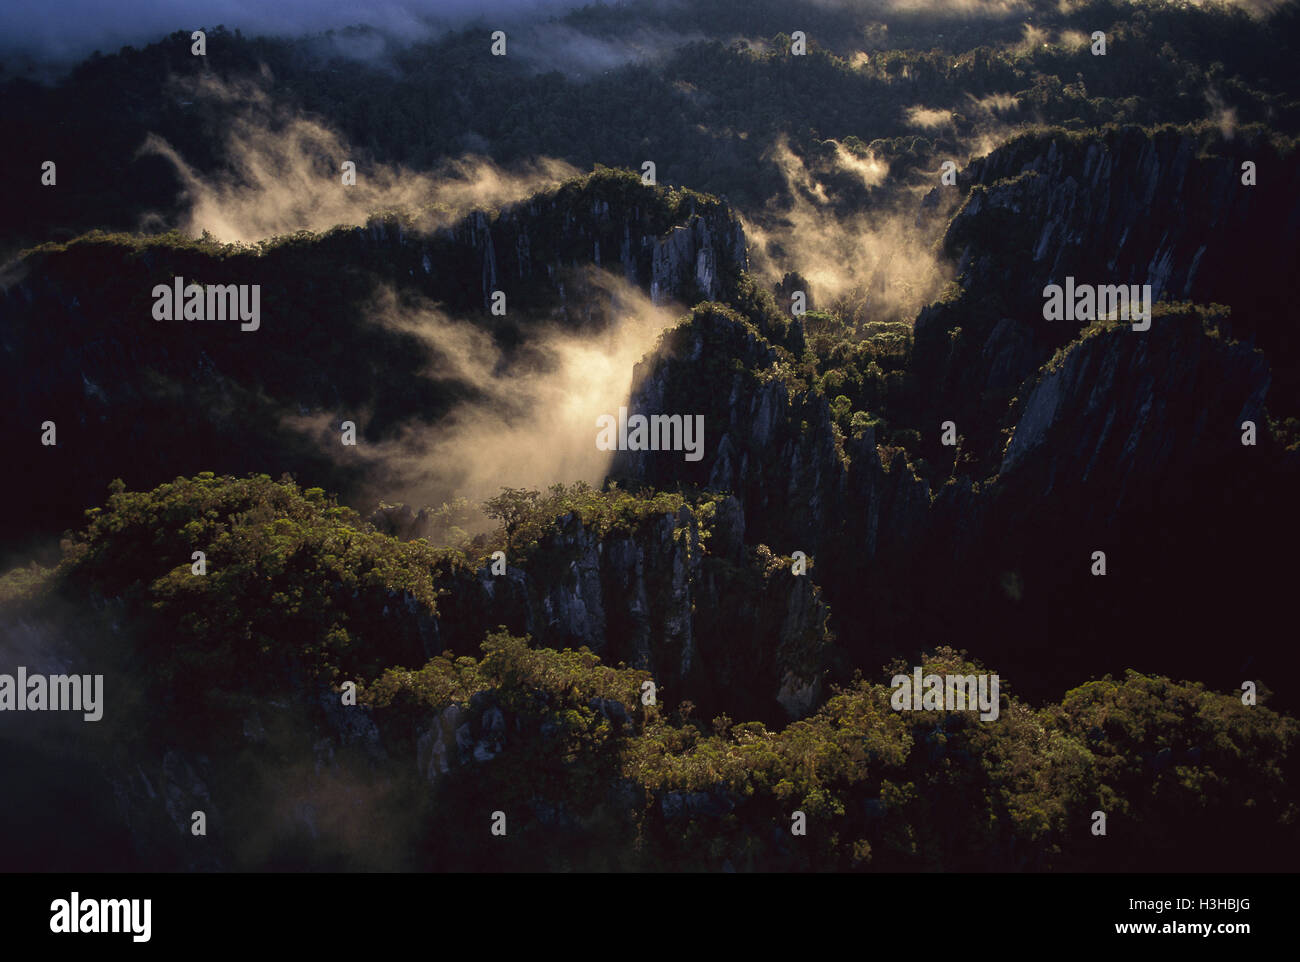 Landscape of Limestone pinnacles covering between 8 and 10 sq km, Stock Photo